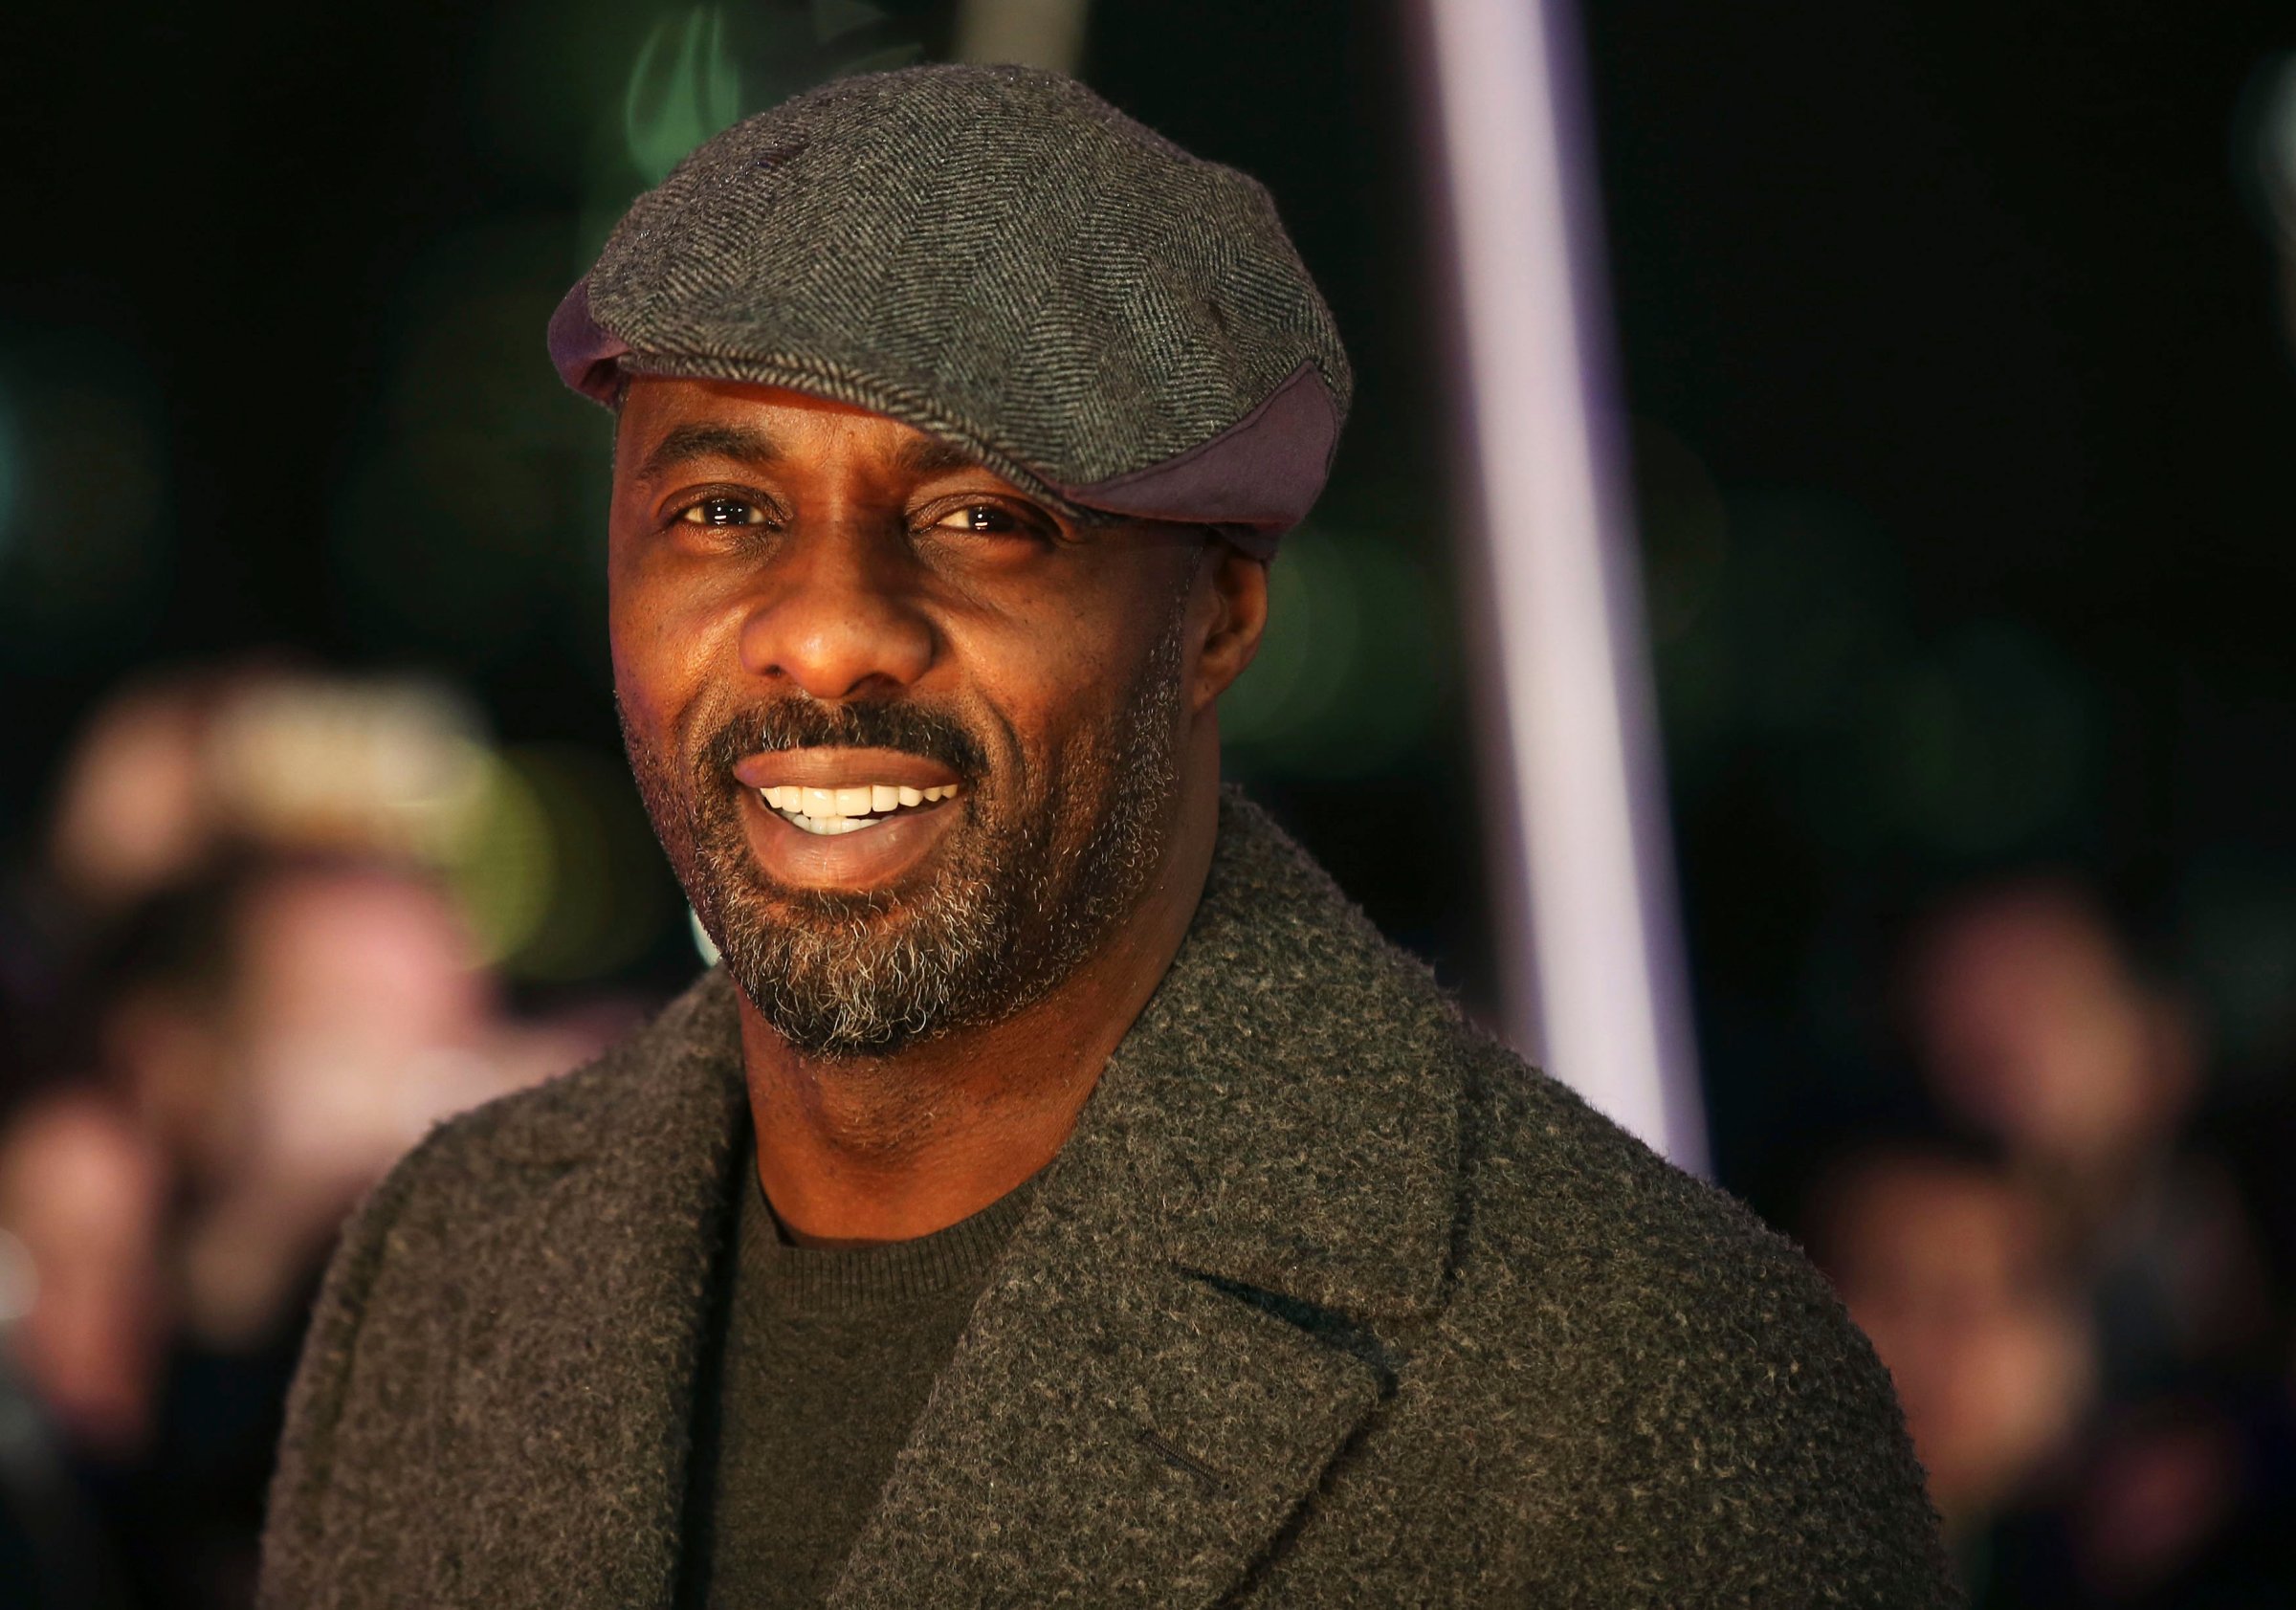 Cast member Idris Elba arrives for the world premiere of the movie 'The Gunman' in London on Feb. 16, 2015.